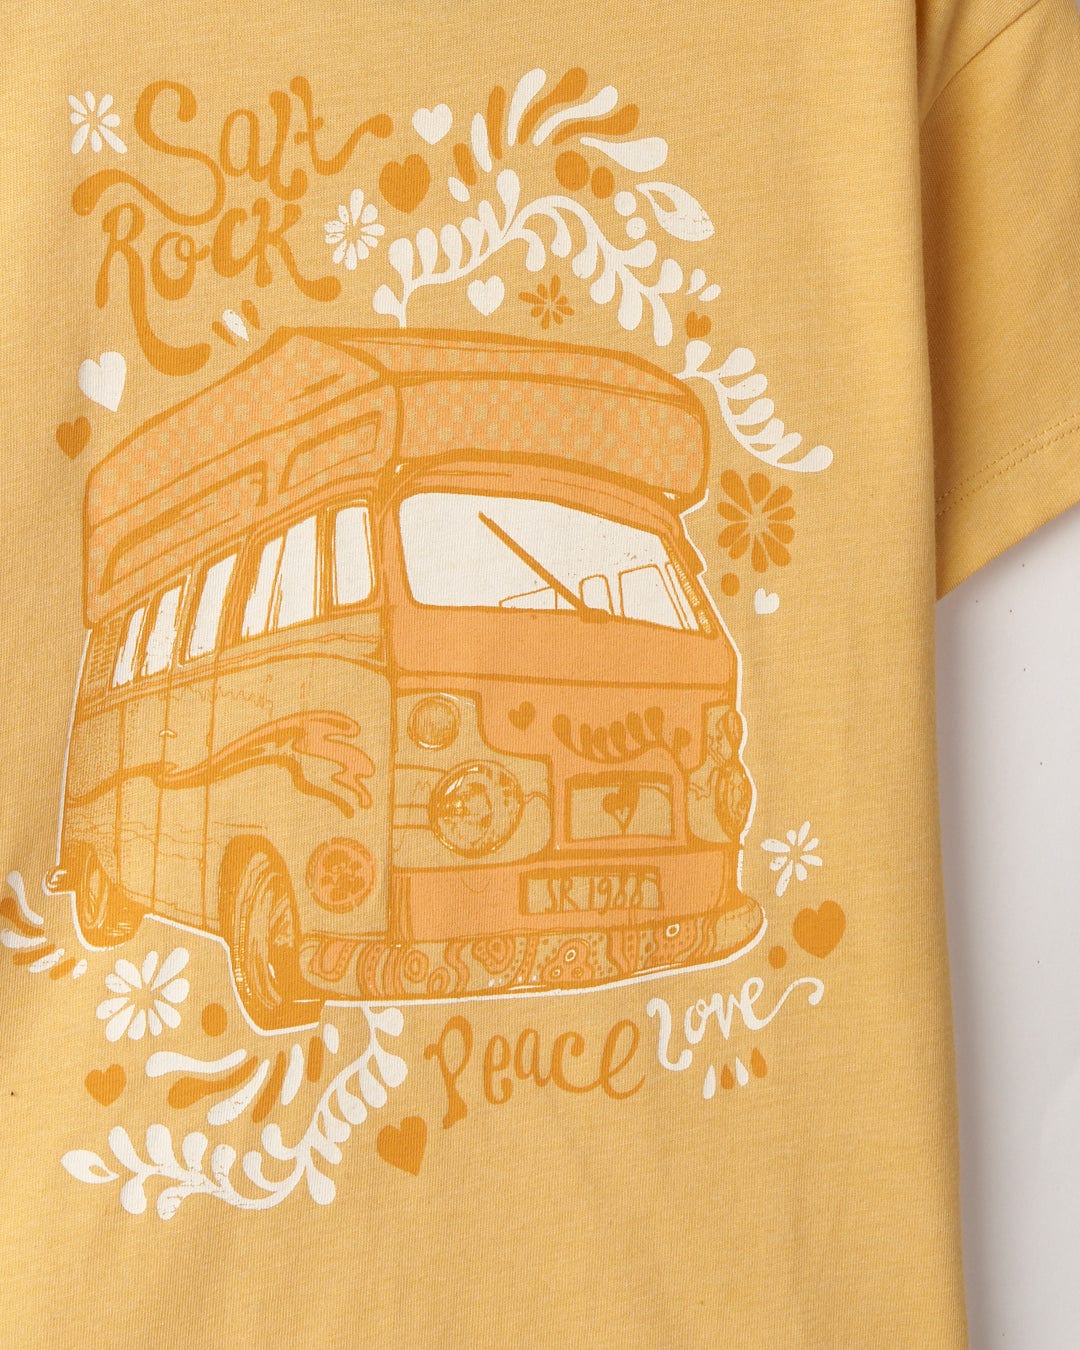 Yellow Tahiti Van - Kids Short Sleeve T-Shirt featuring a van-life graphic print of a vintage van surrounded by floral patterns and the words "Saltrock Tok" and "peace love".